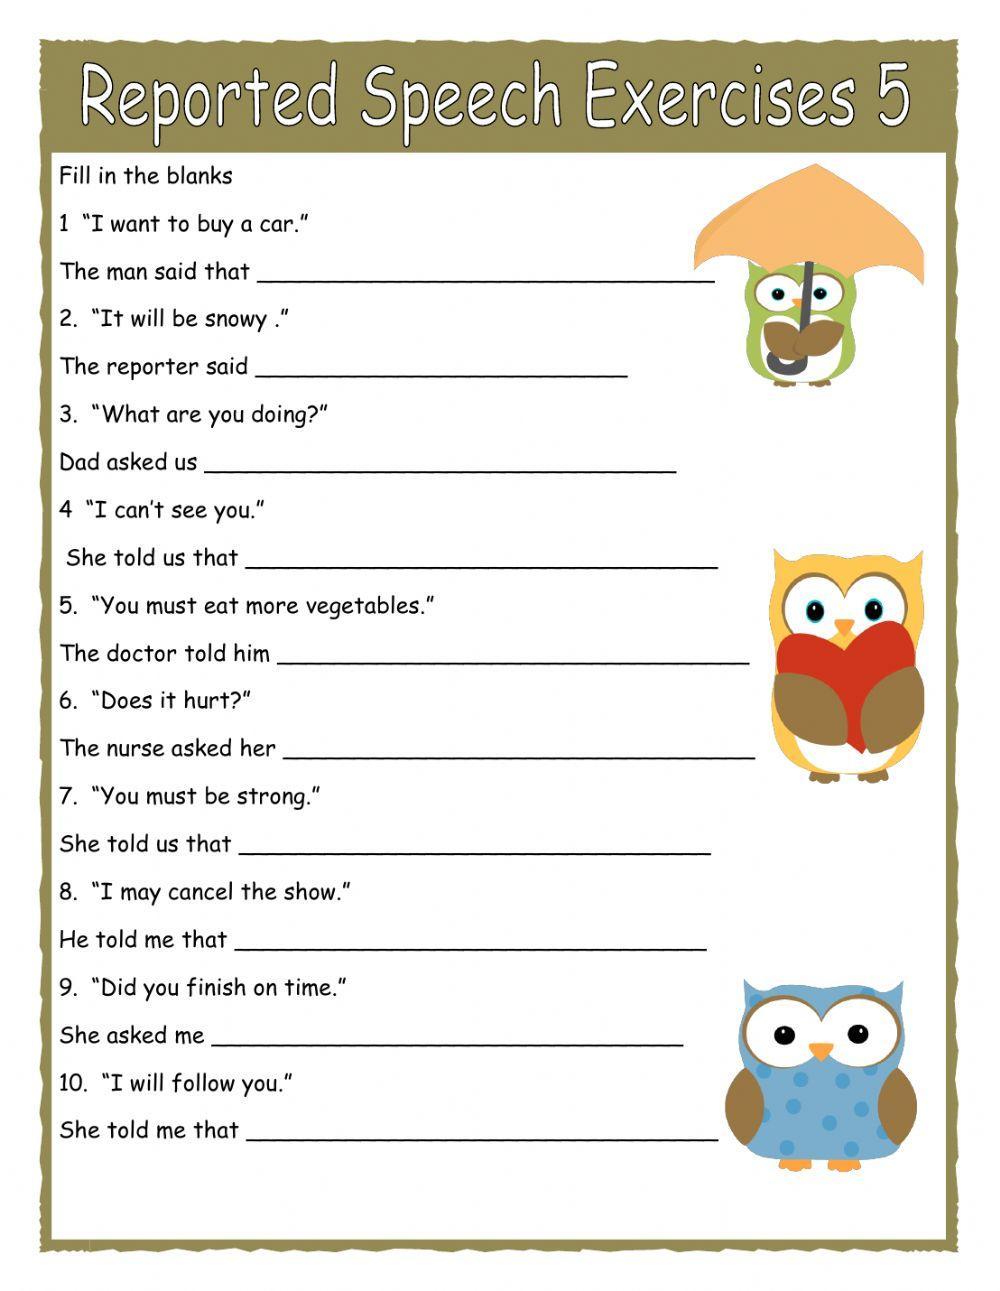 reported speech test liveworksheets